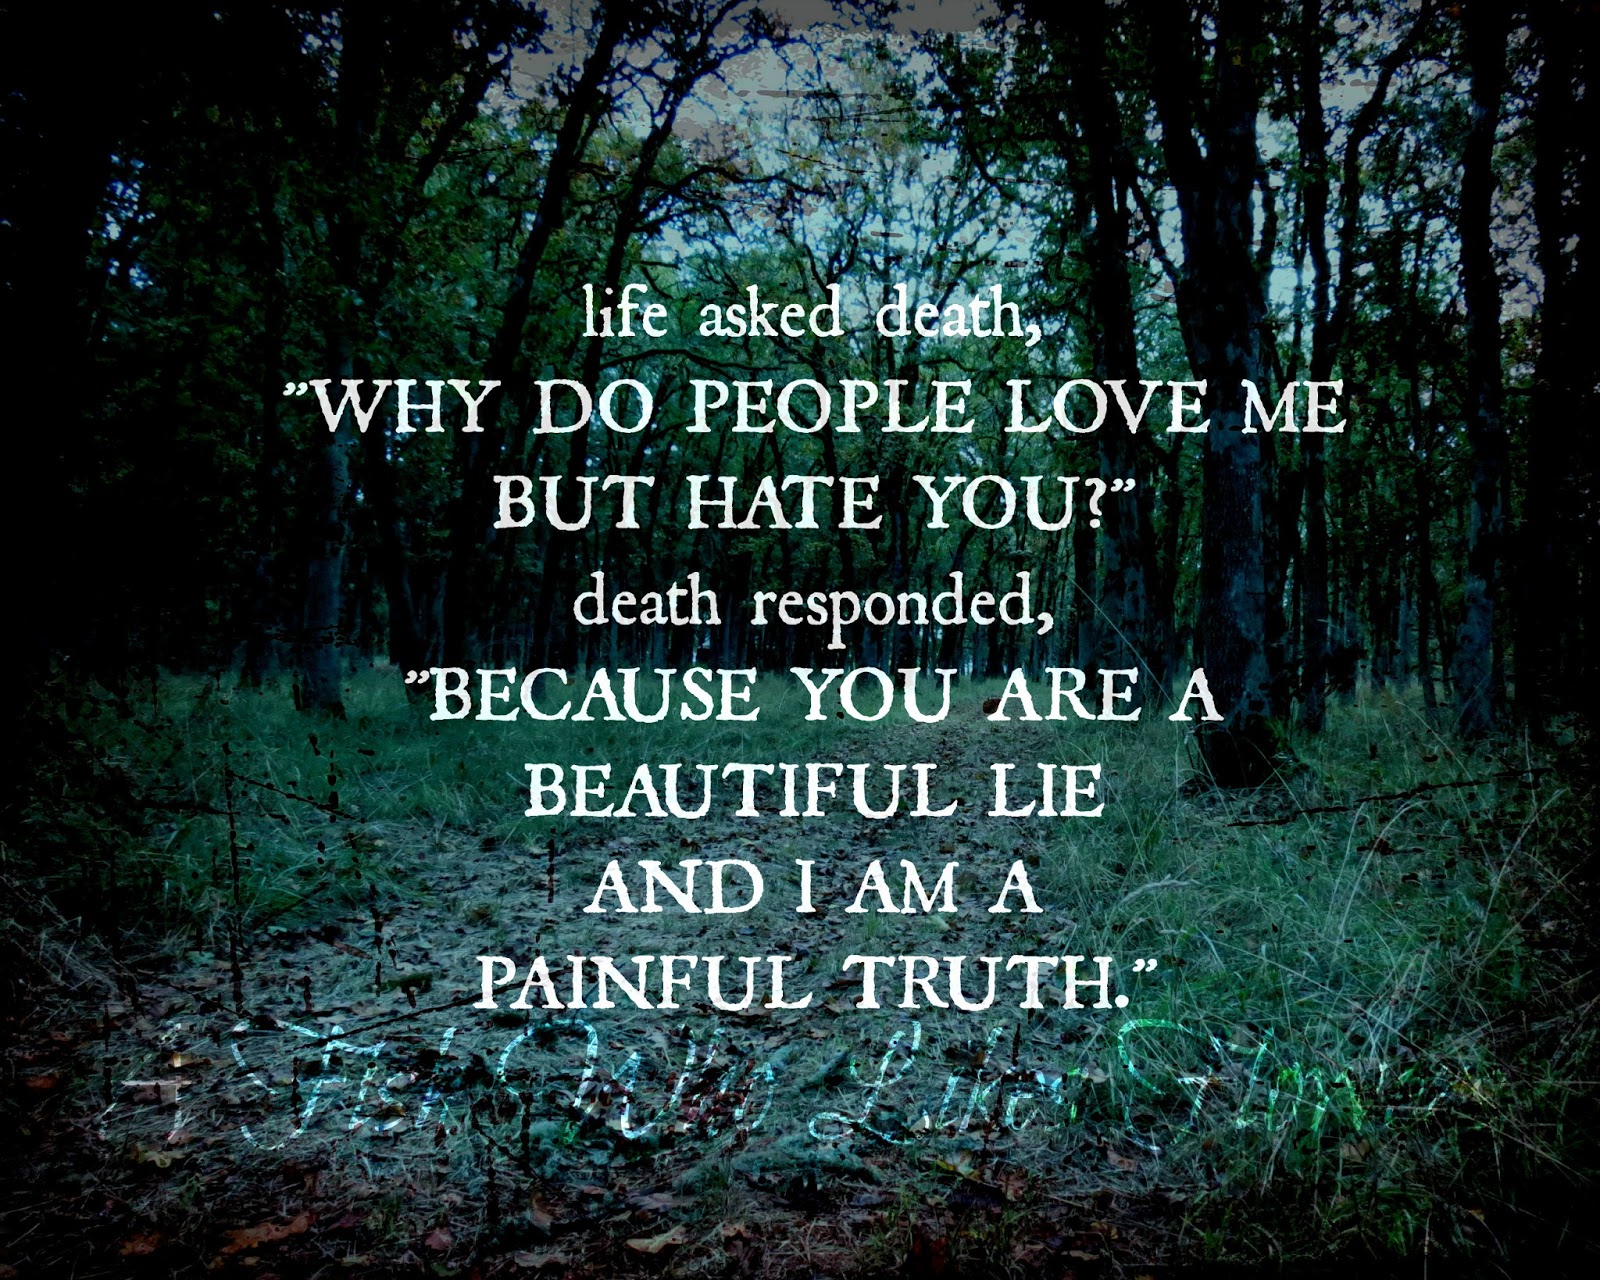 life asked "Why do people love me but hate you " responded "Because you are a beautiful lie and I am a painful truth "